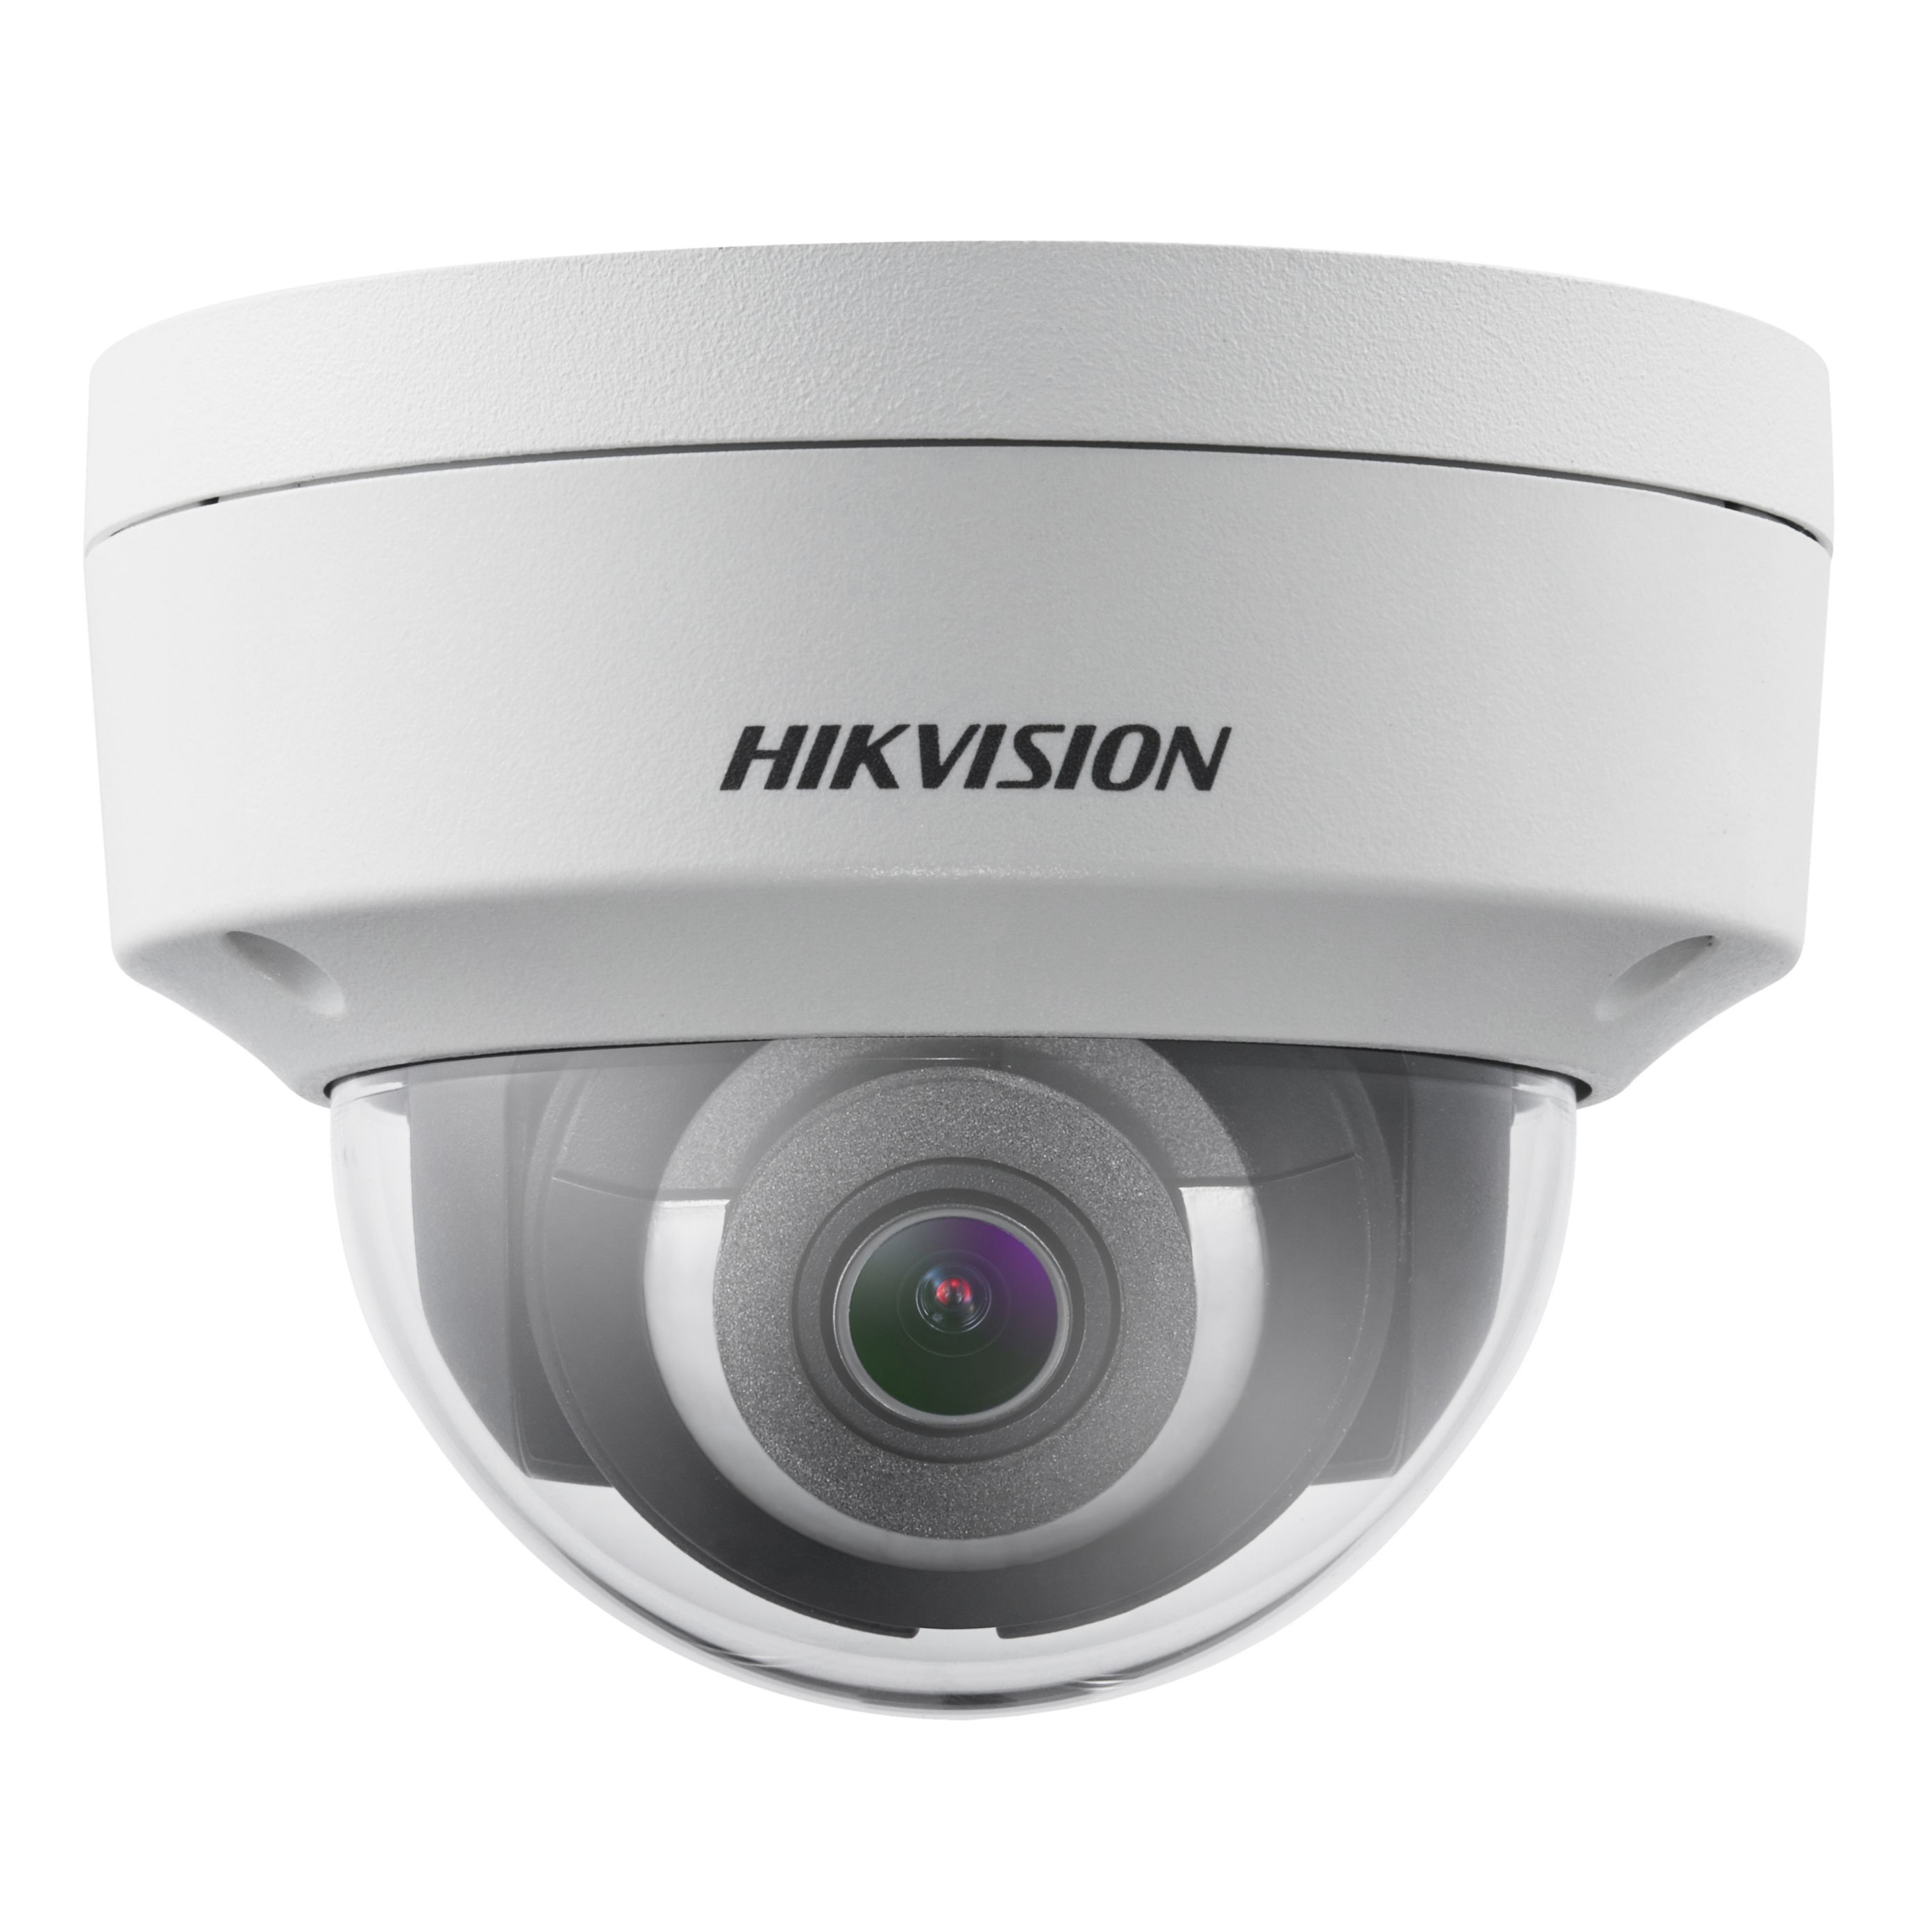 *OPEN BOX* Hikvision DS-2CD2143G0-I 4mm 4MP Dome Network Camera *SPECIAL OFFER*